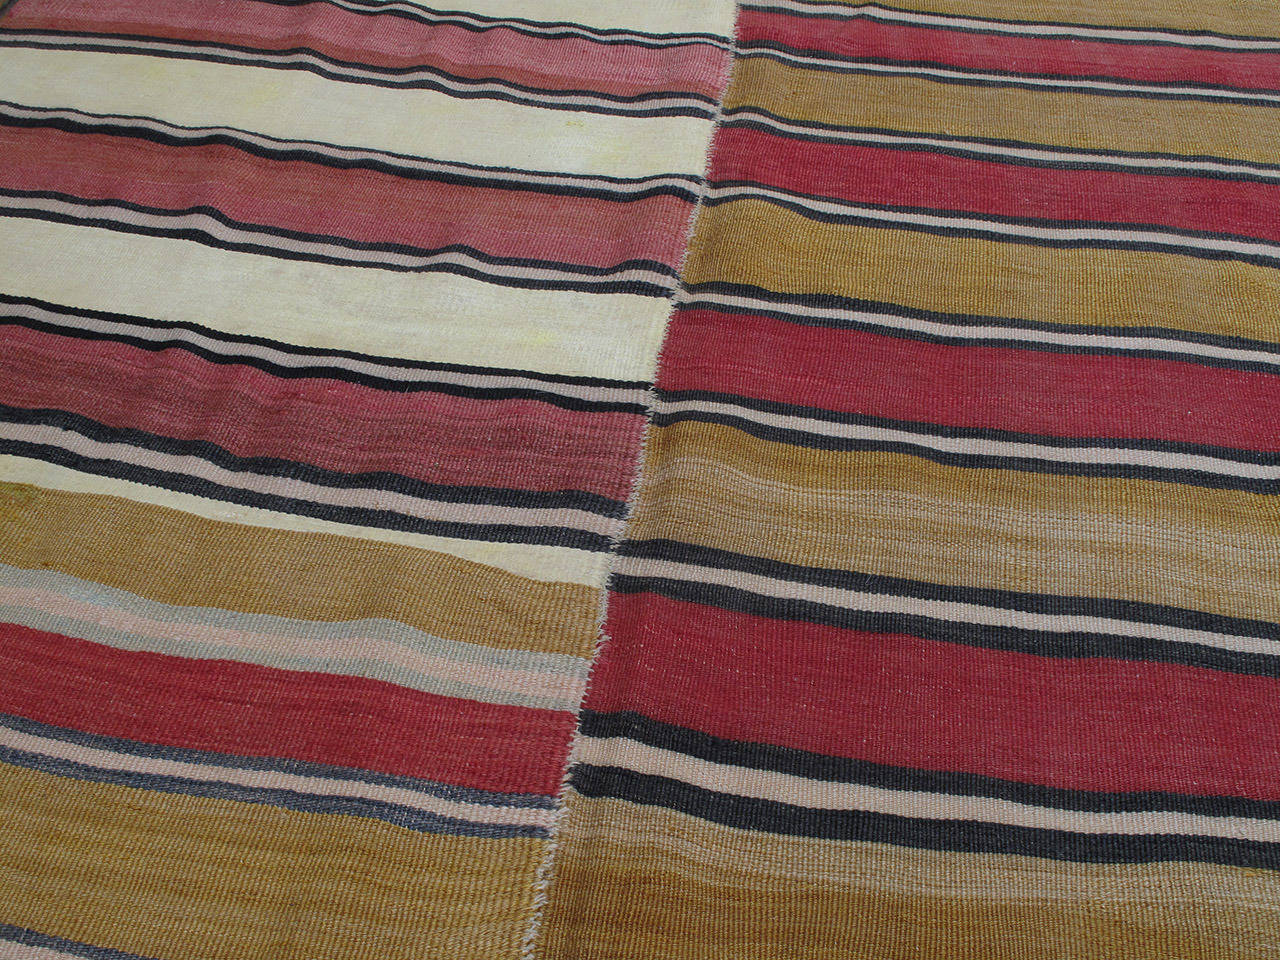 Hand-Woven Banded Kilim Runner Rug in Two Panels